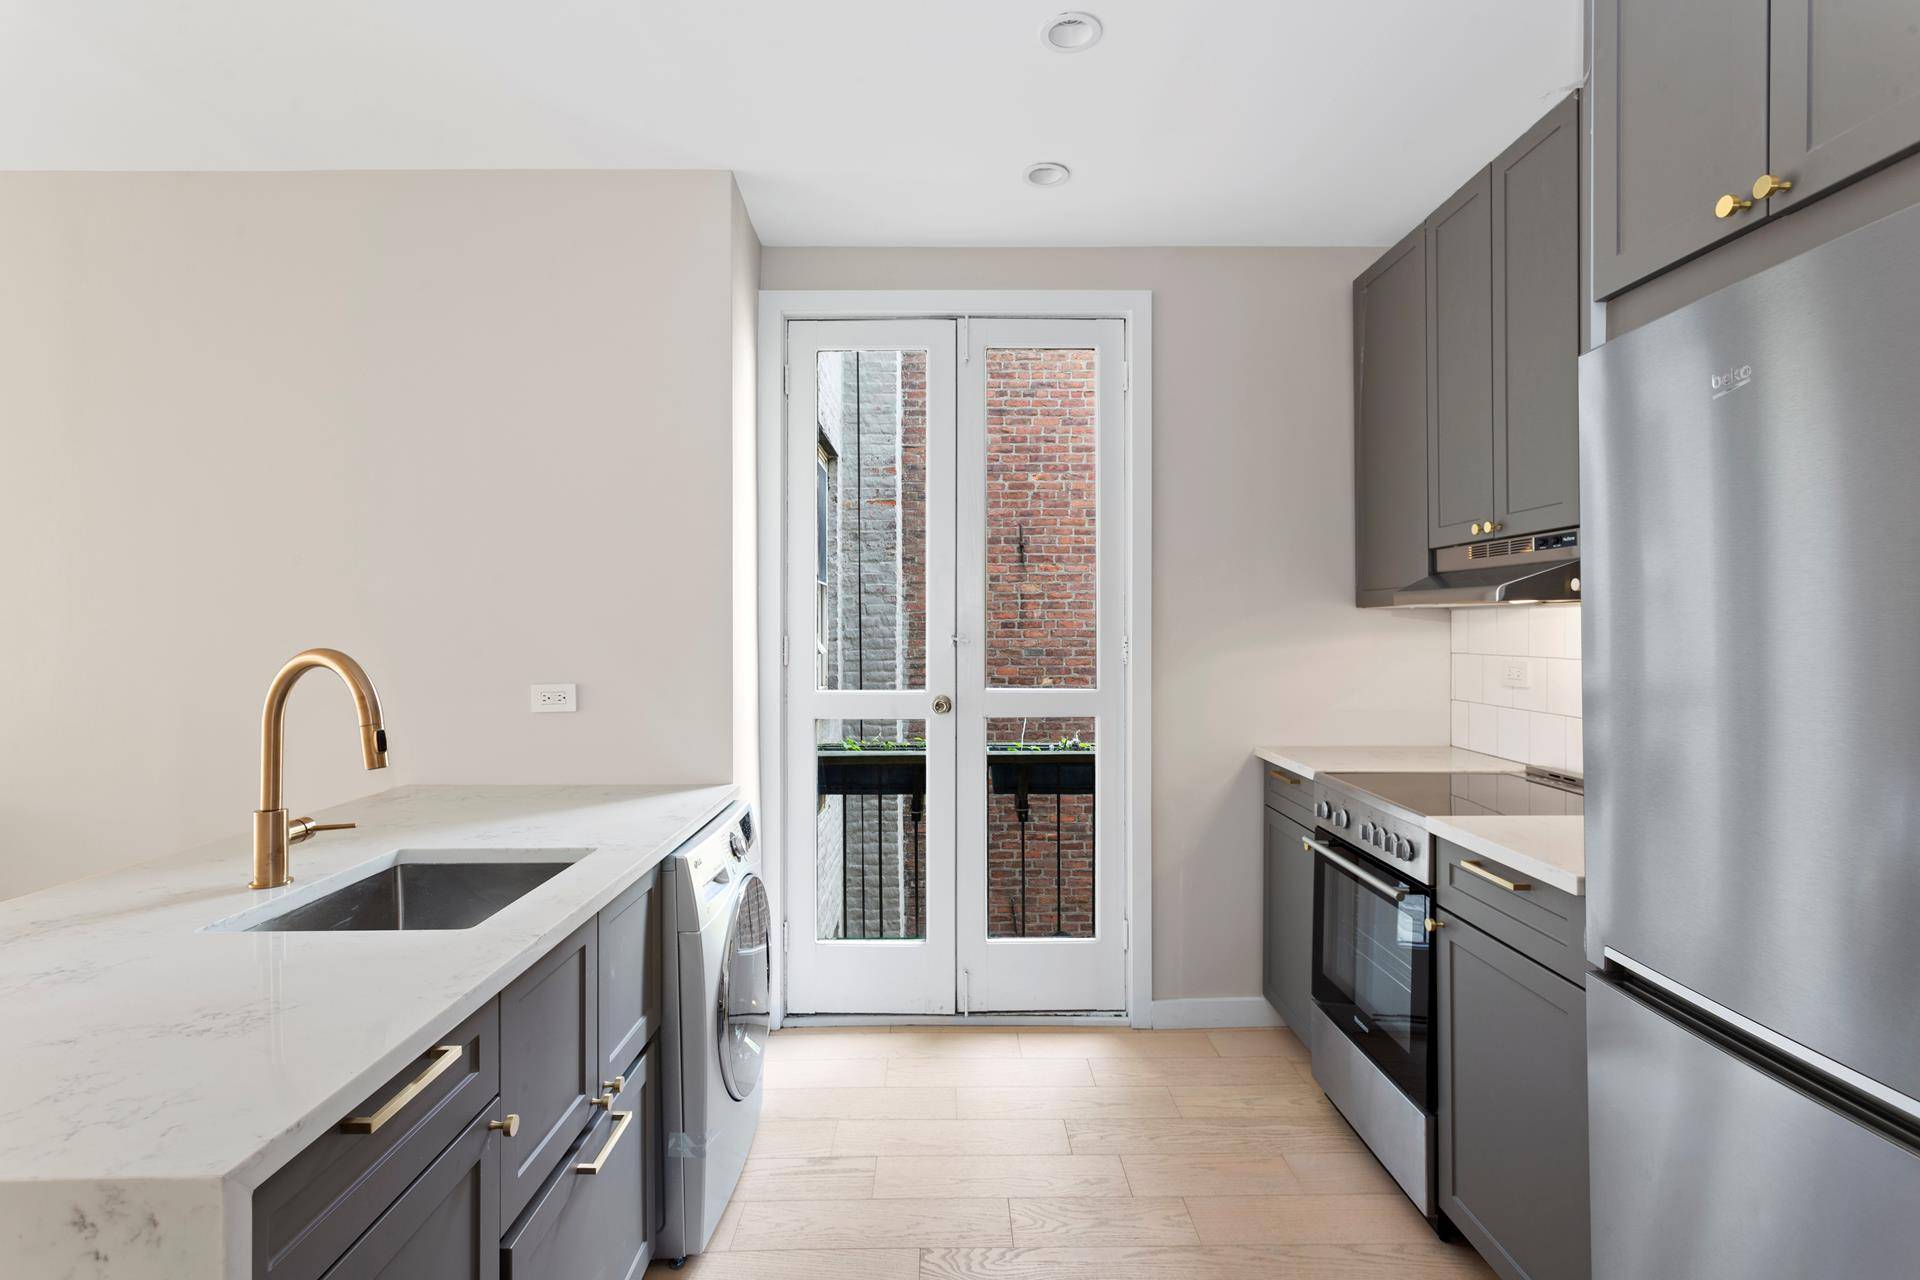 Short term rentalPresenting 16 Monroe Place, a beautifully restored prewar rental building on a tree lined brownstone block in the heart of Brooklyn Heights.